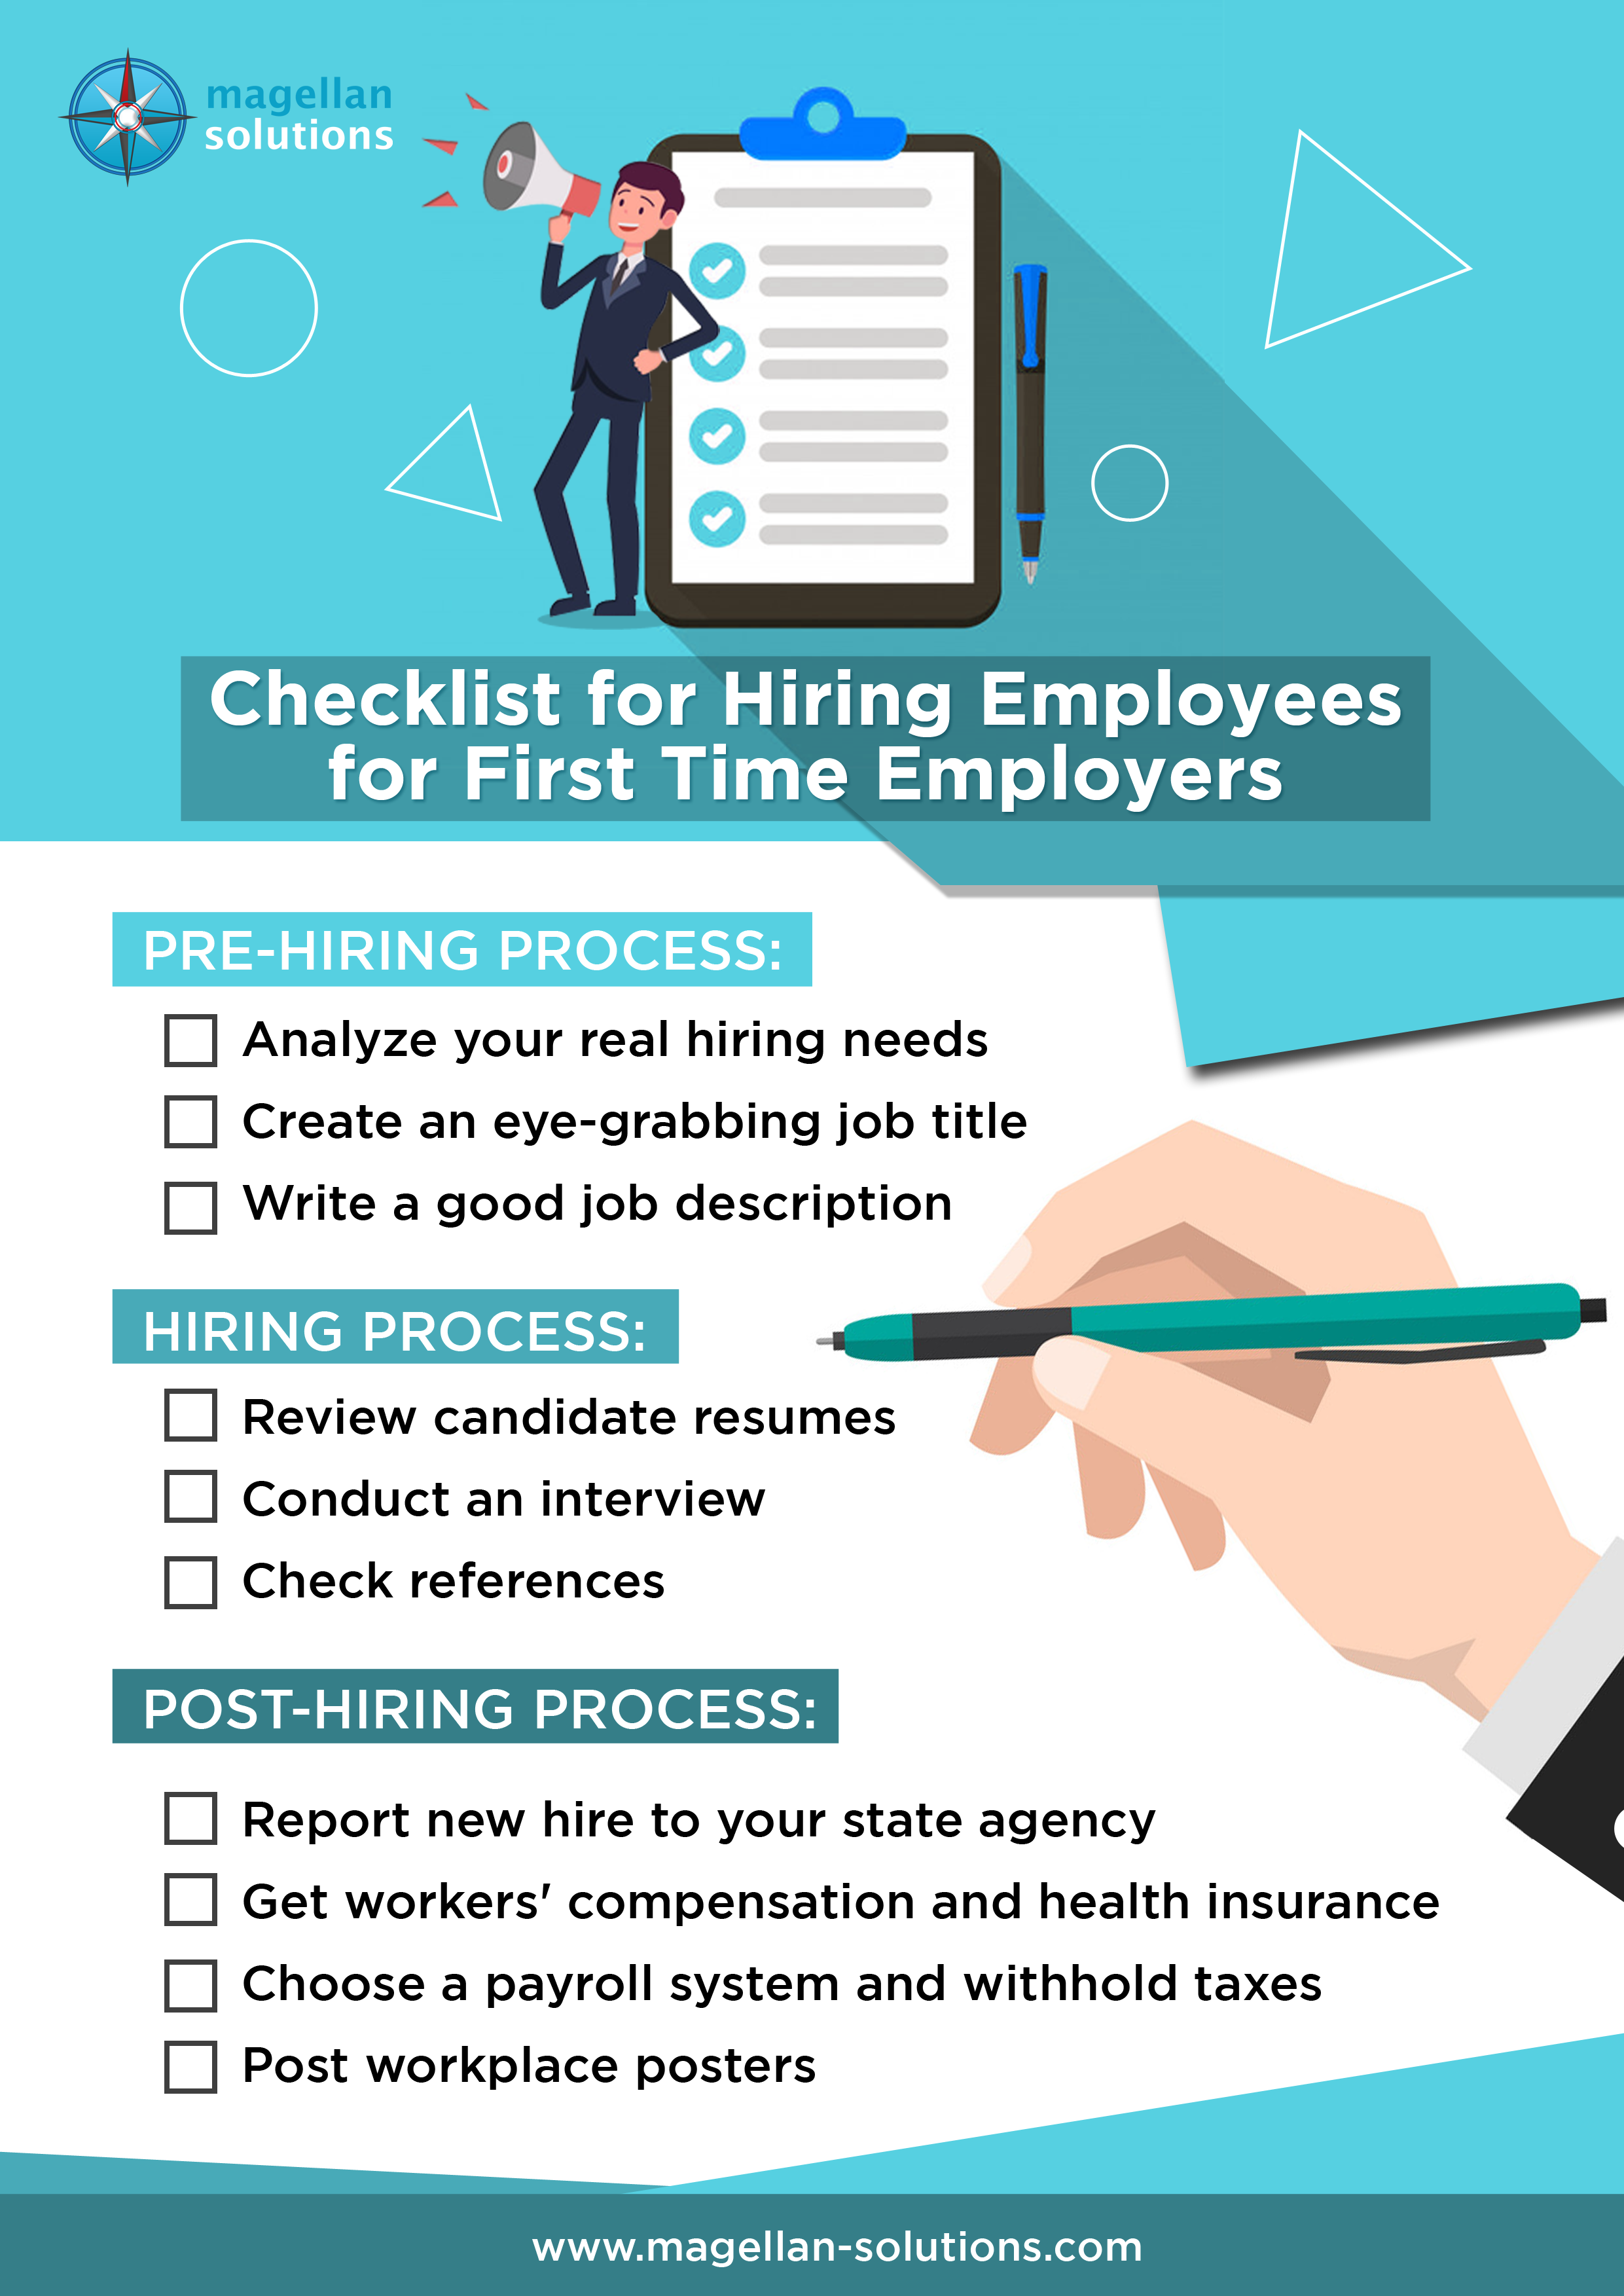 Checklist for Hiring Employees